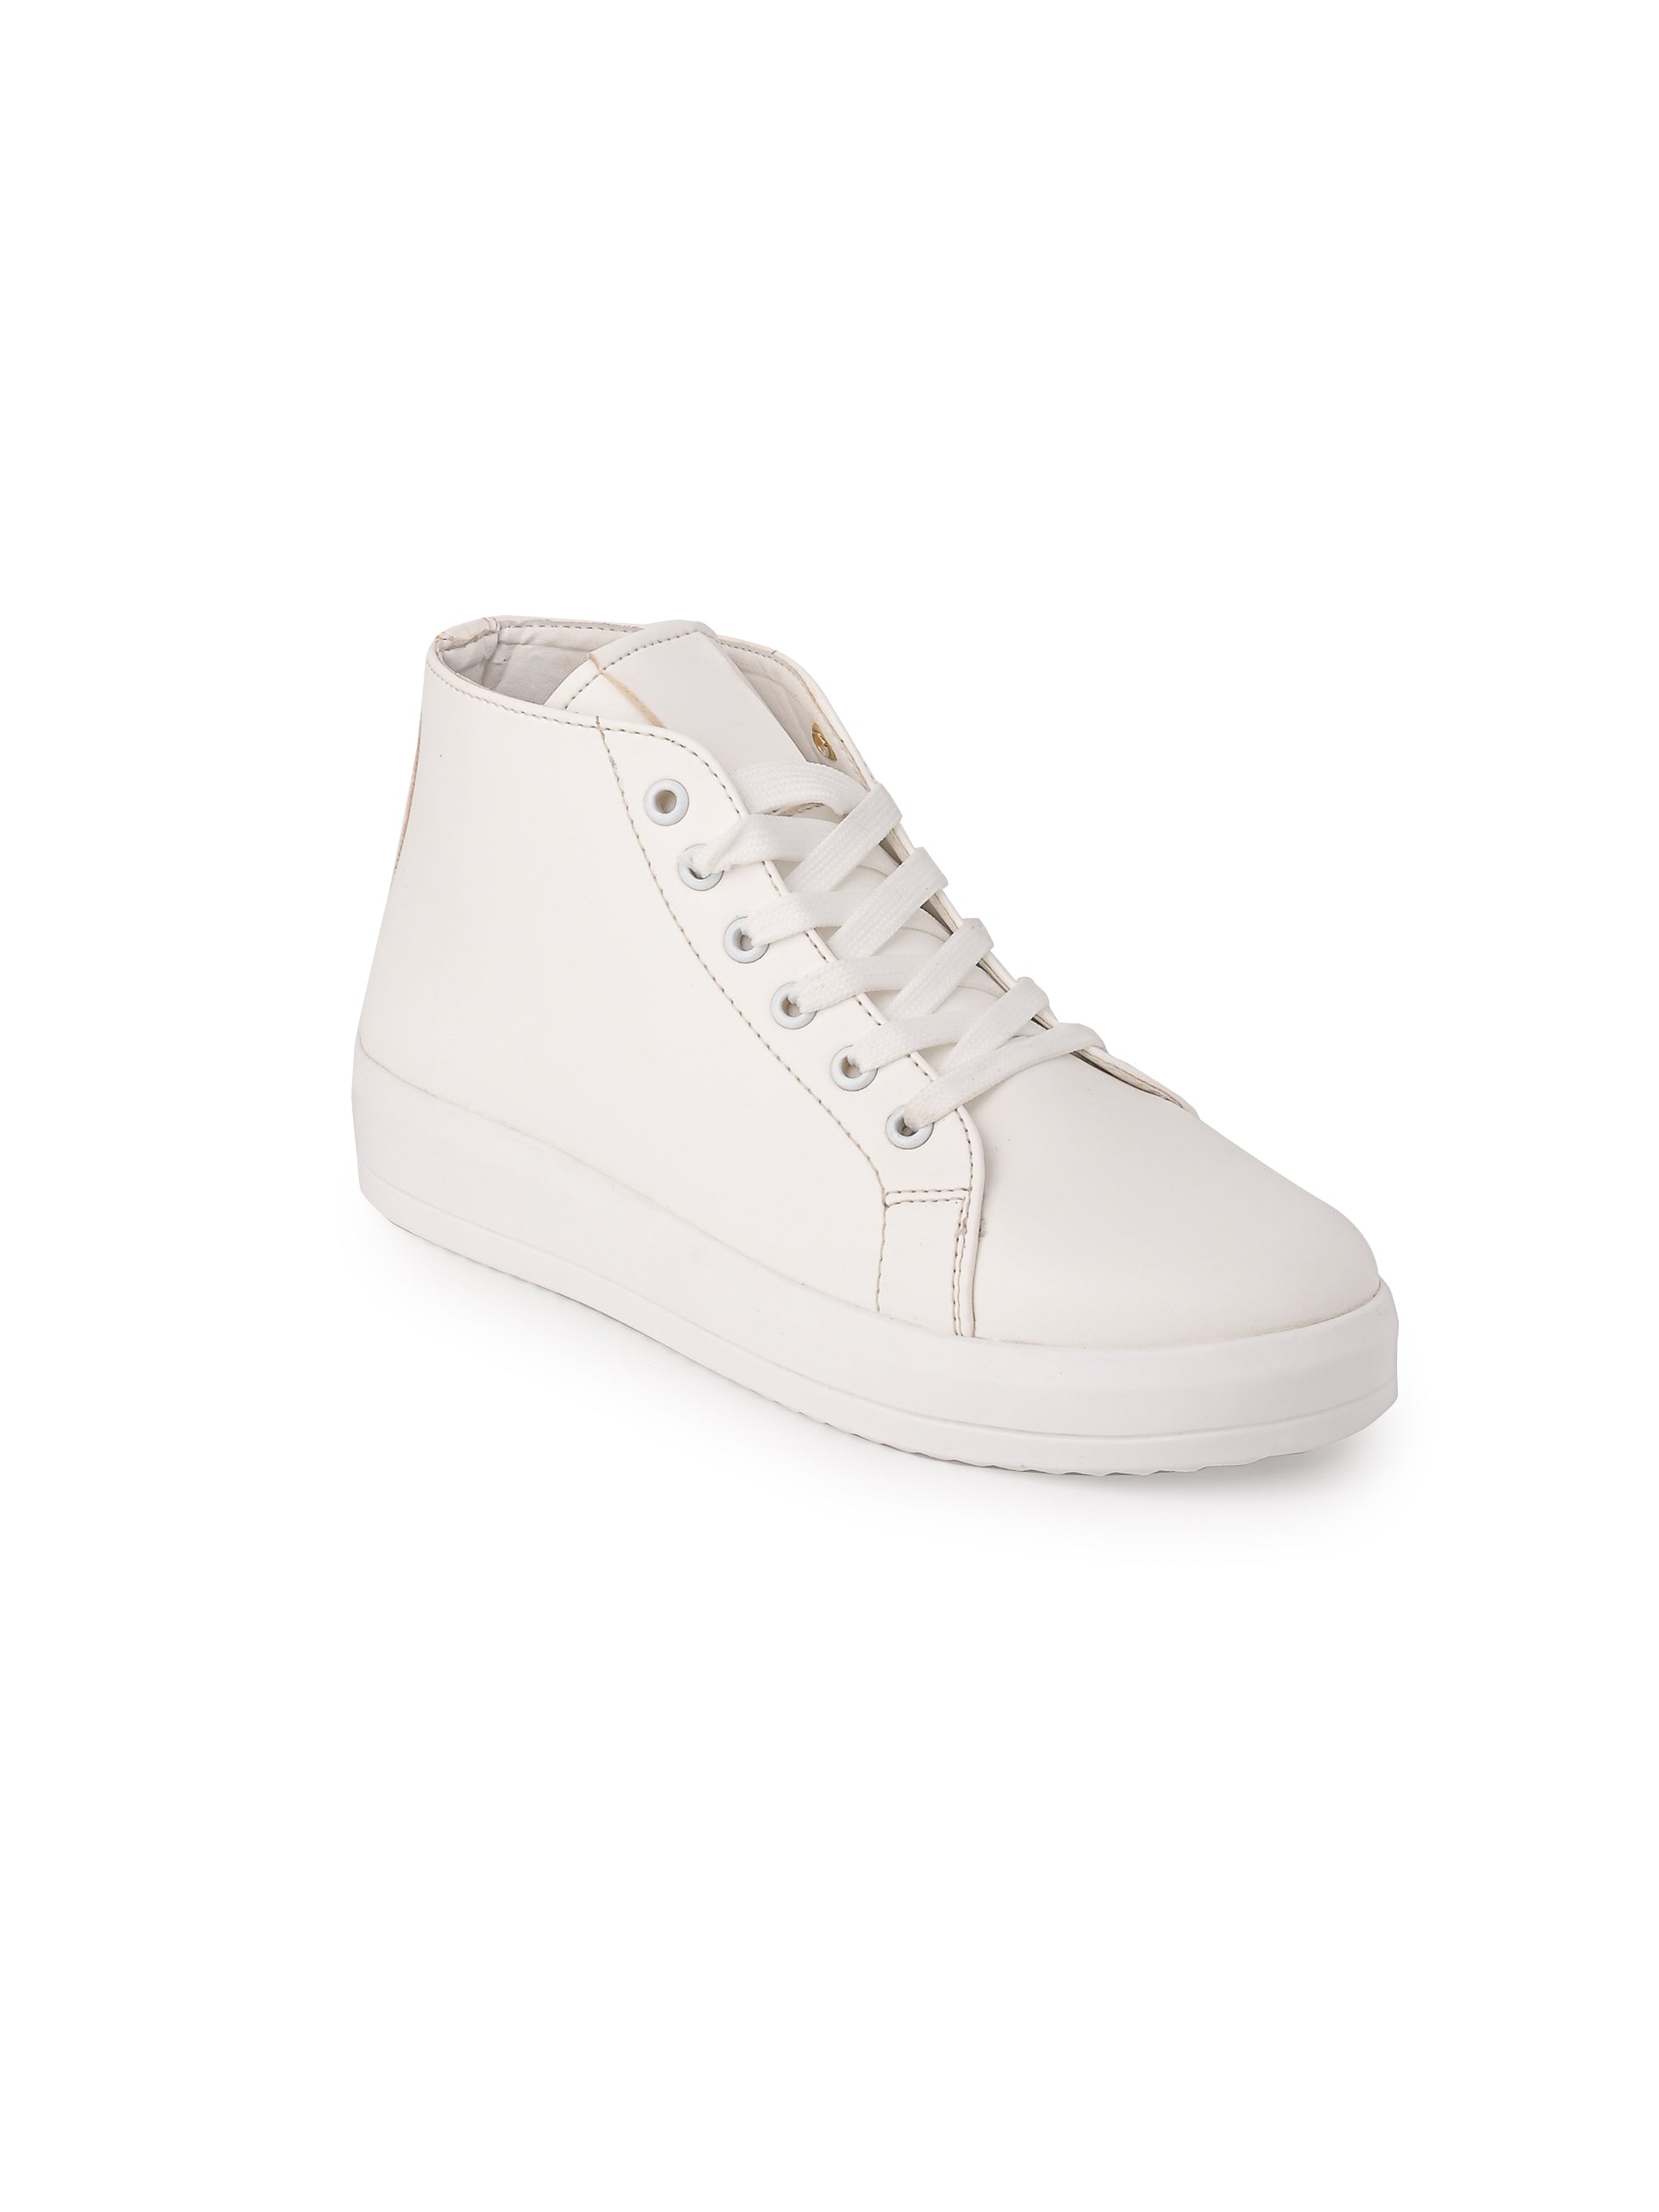 Esmee Cityscape Trainers for Women - White